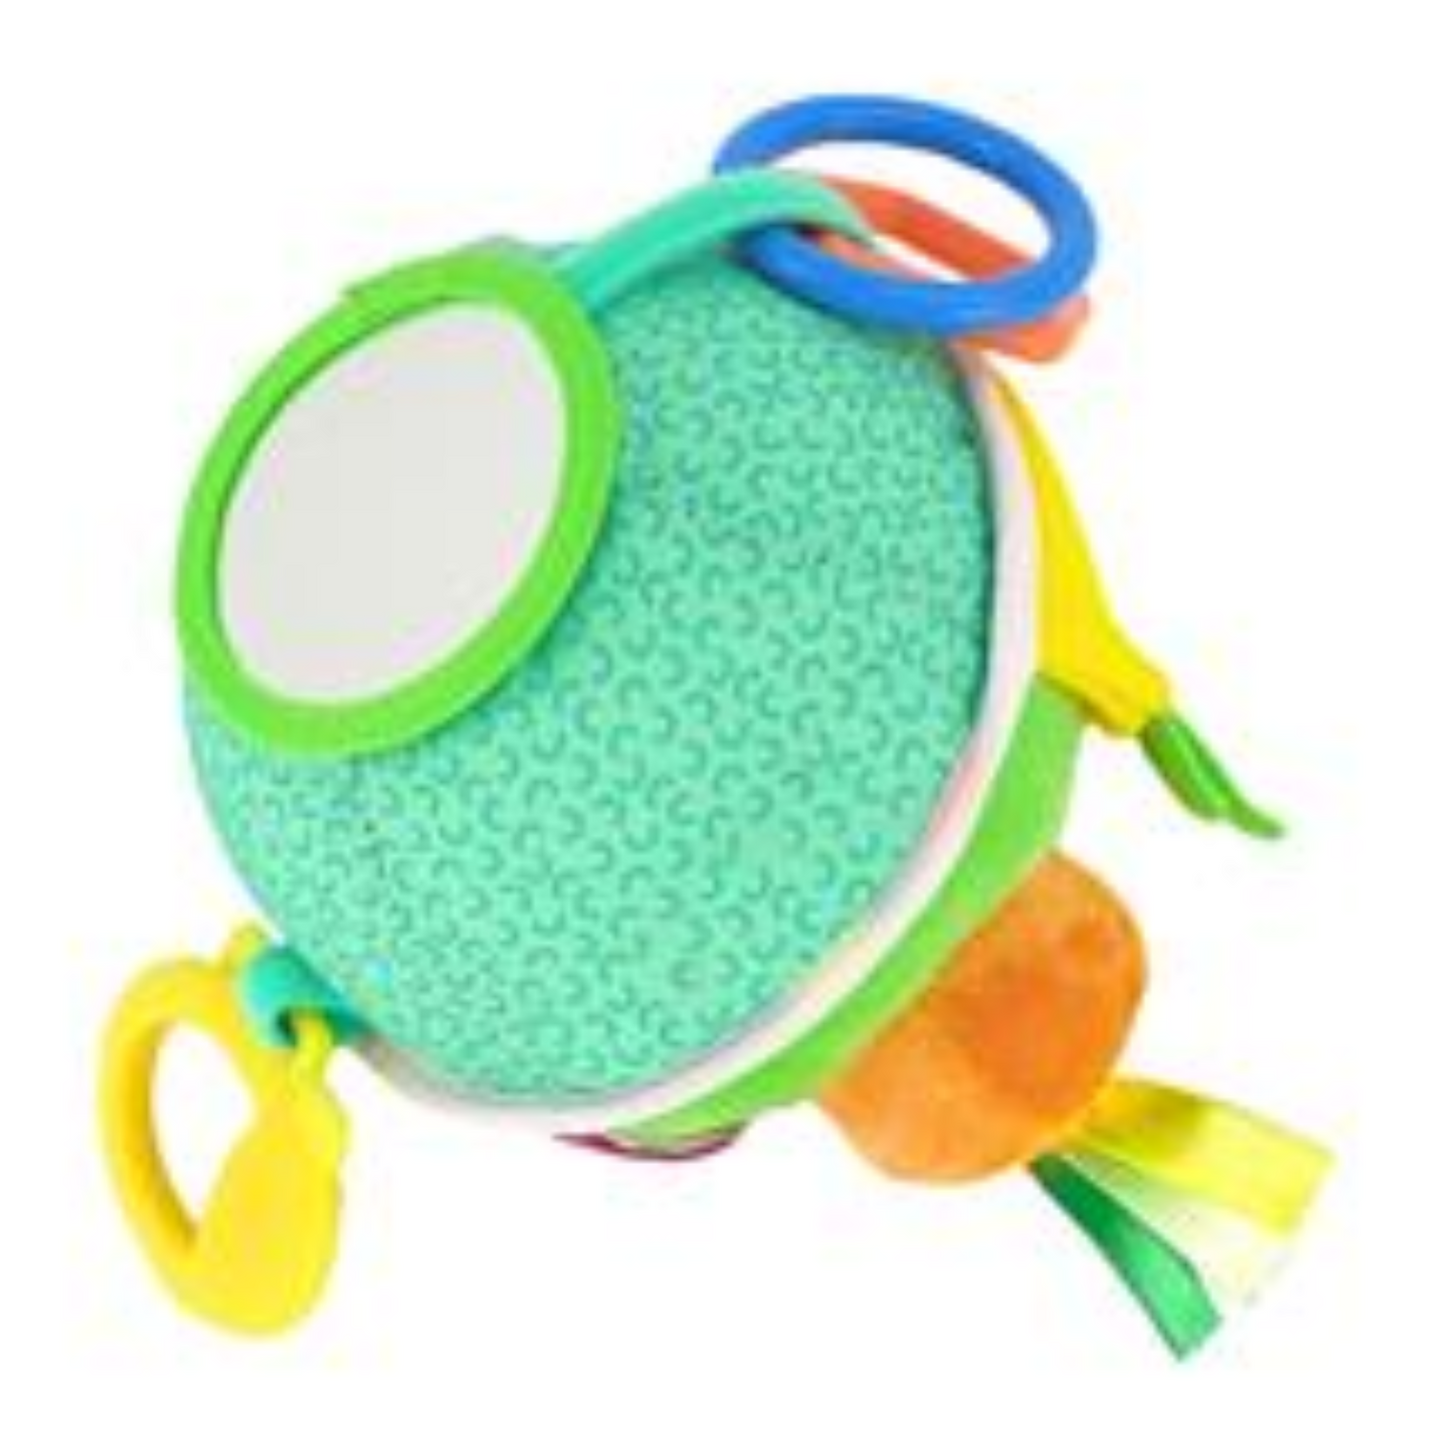 Infantino Busy Lil Sensory Ball - Suitable 3 months+